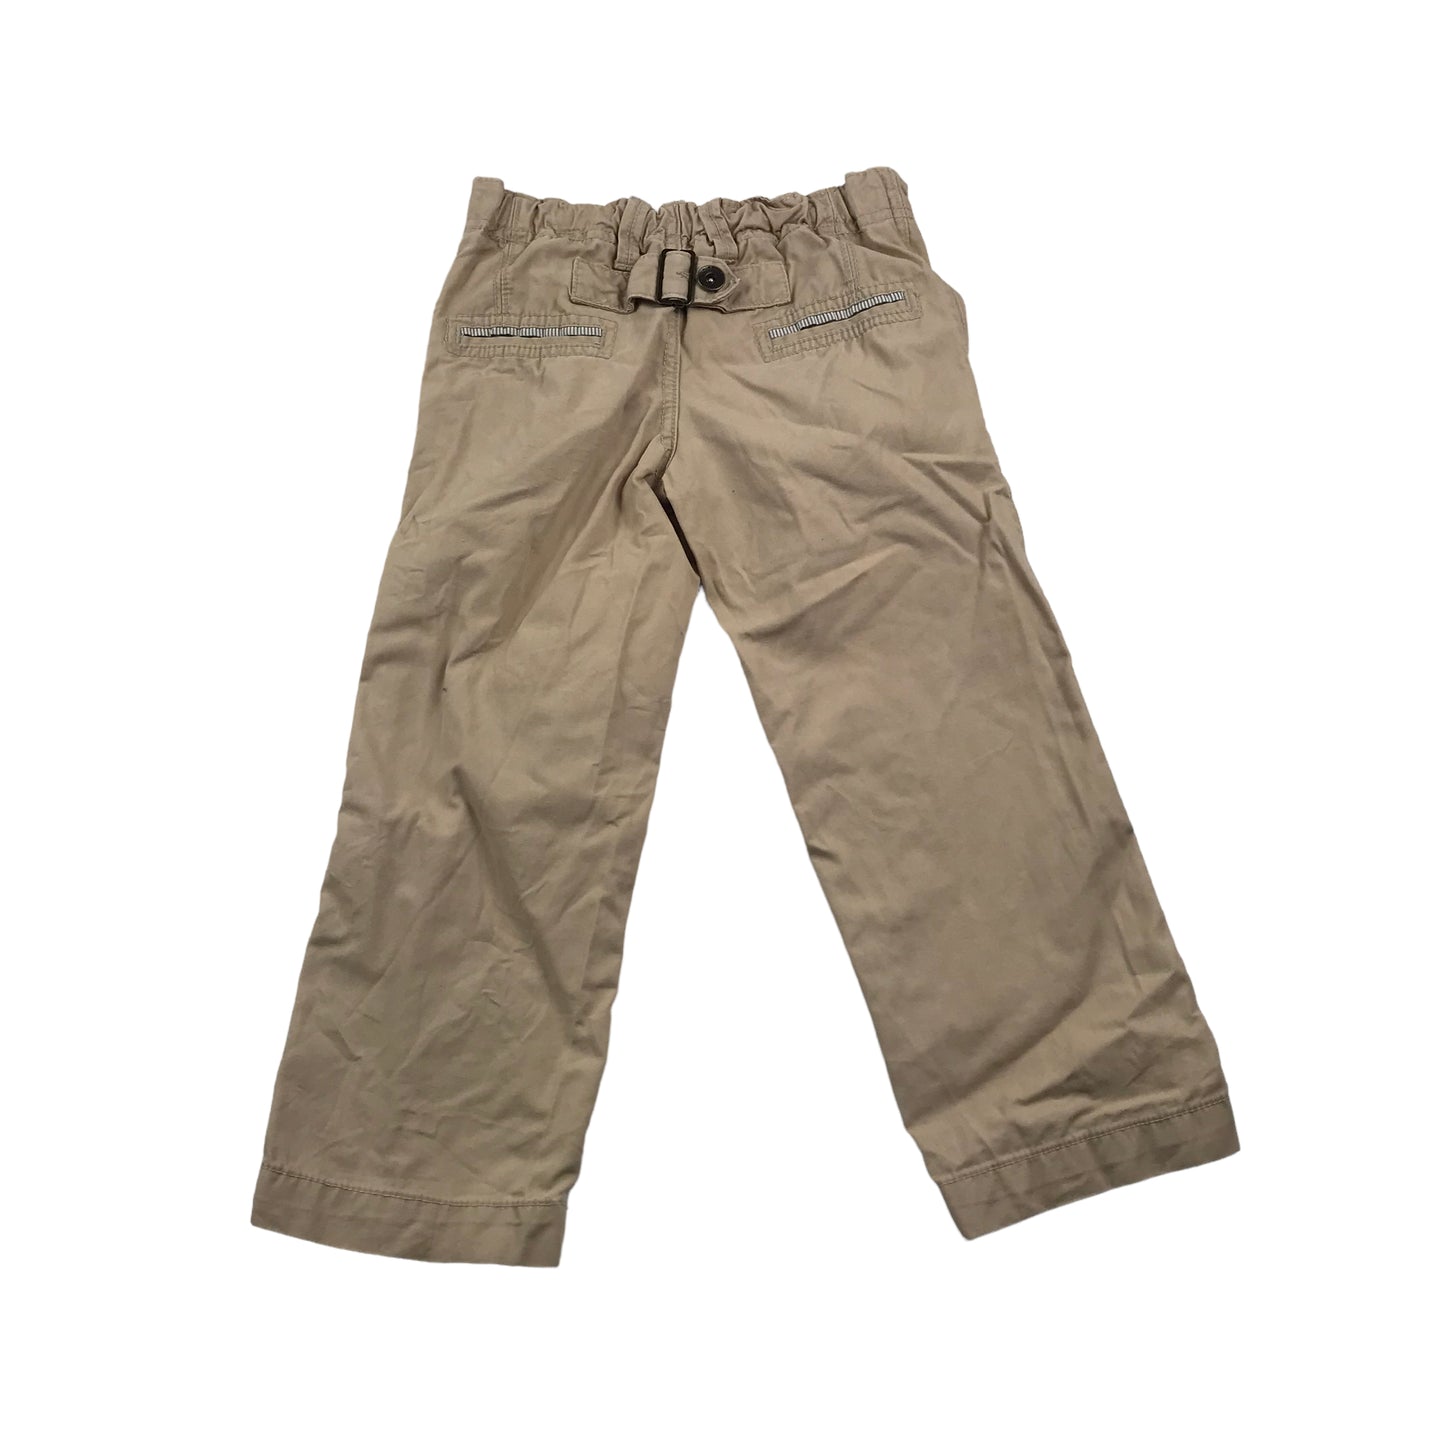 M&S Beige Chino Style Trousers Age 4